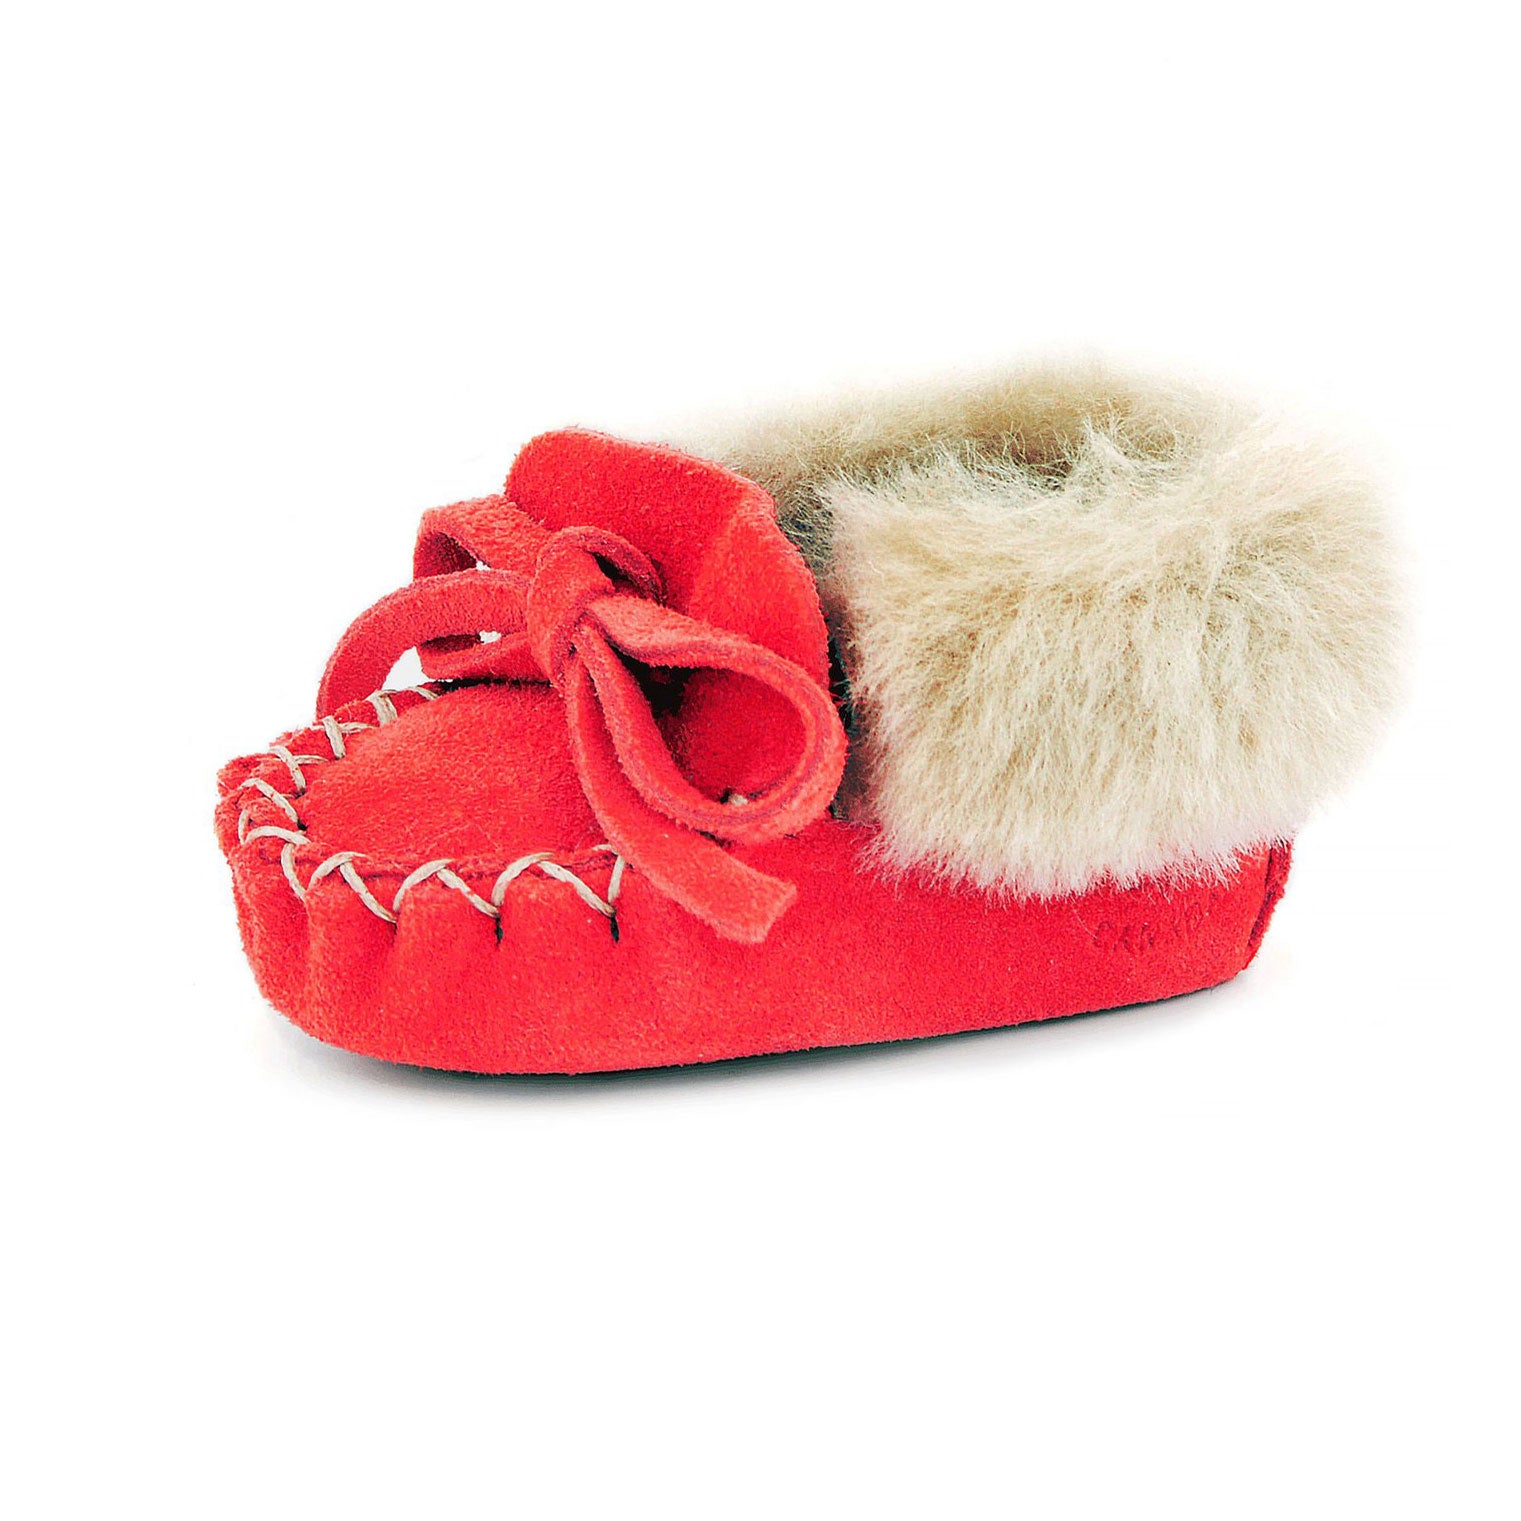 Baby mocs in red leather at Bonjour Baby Baskets